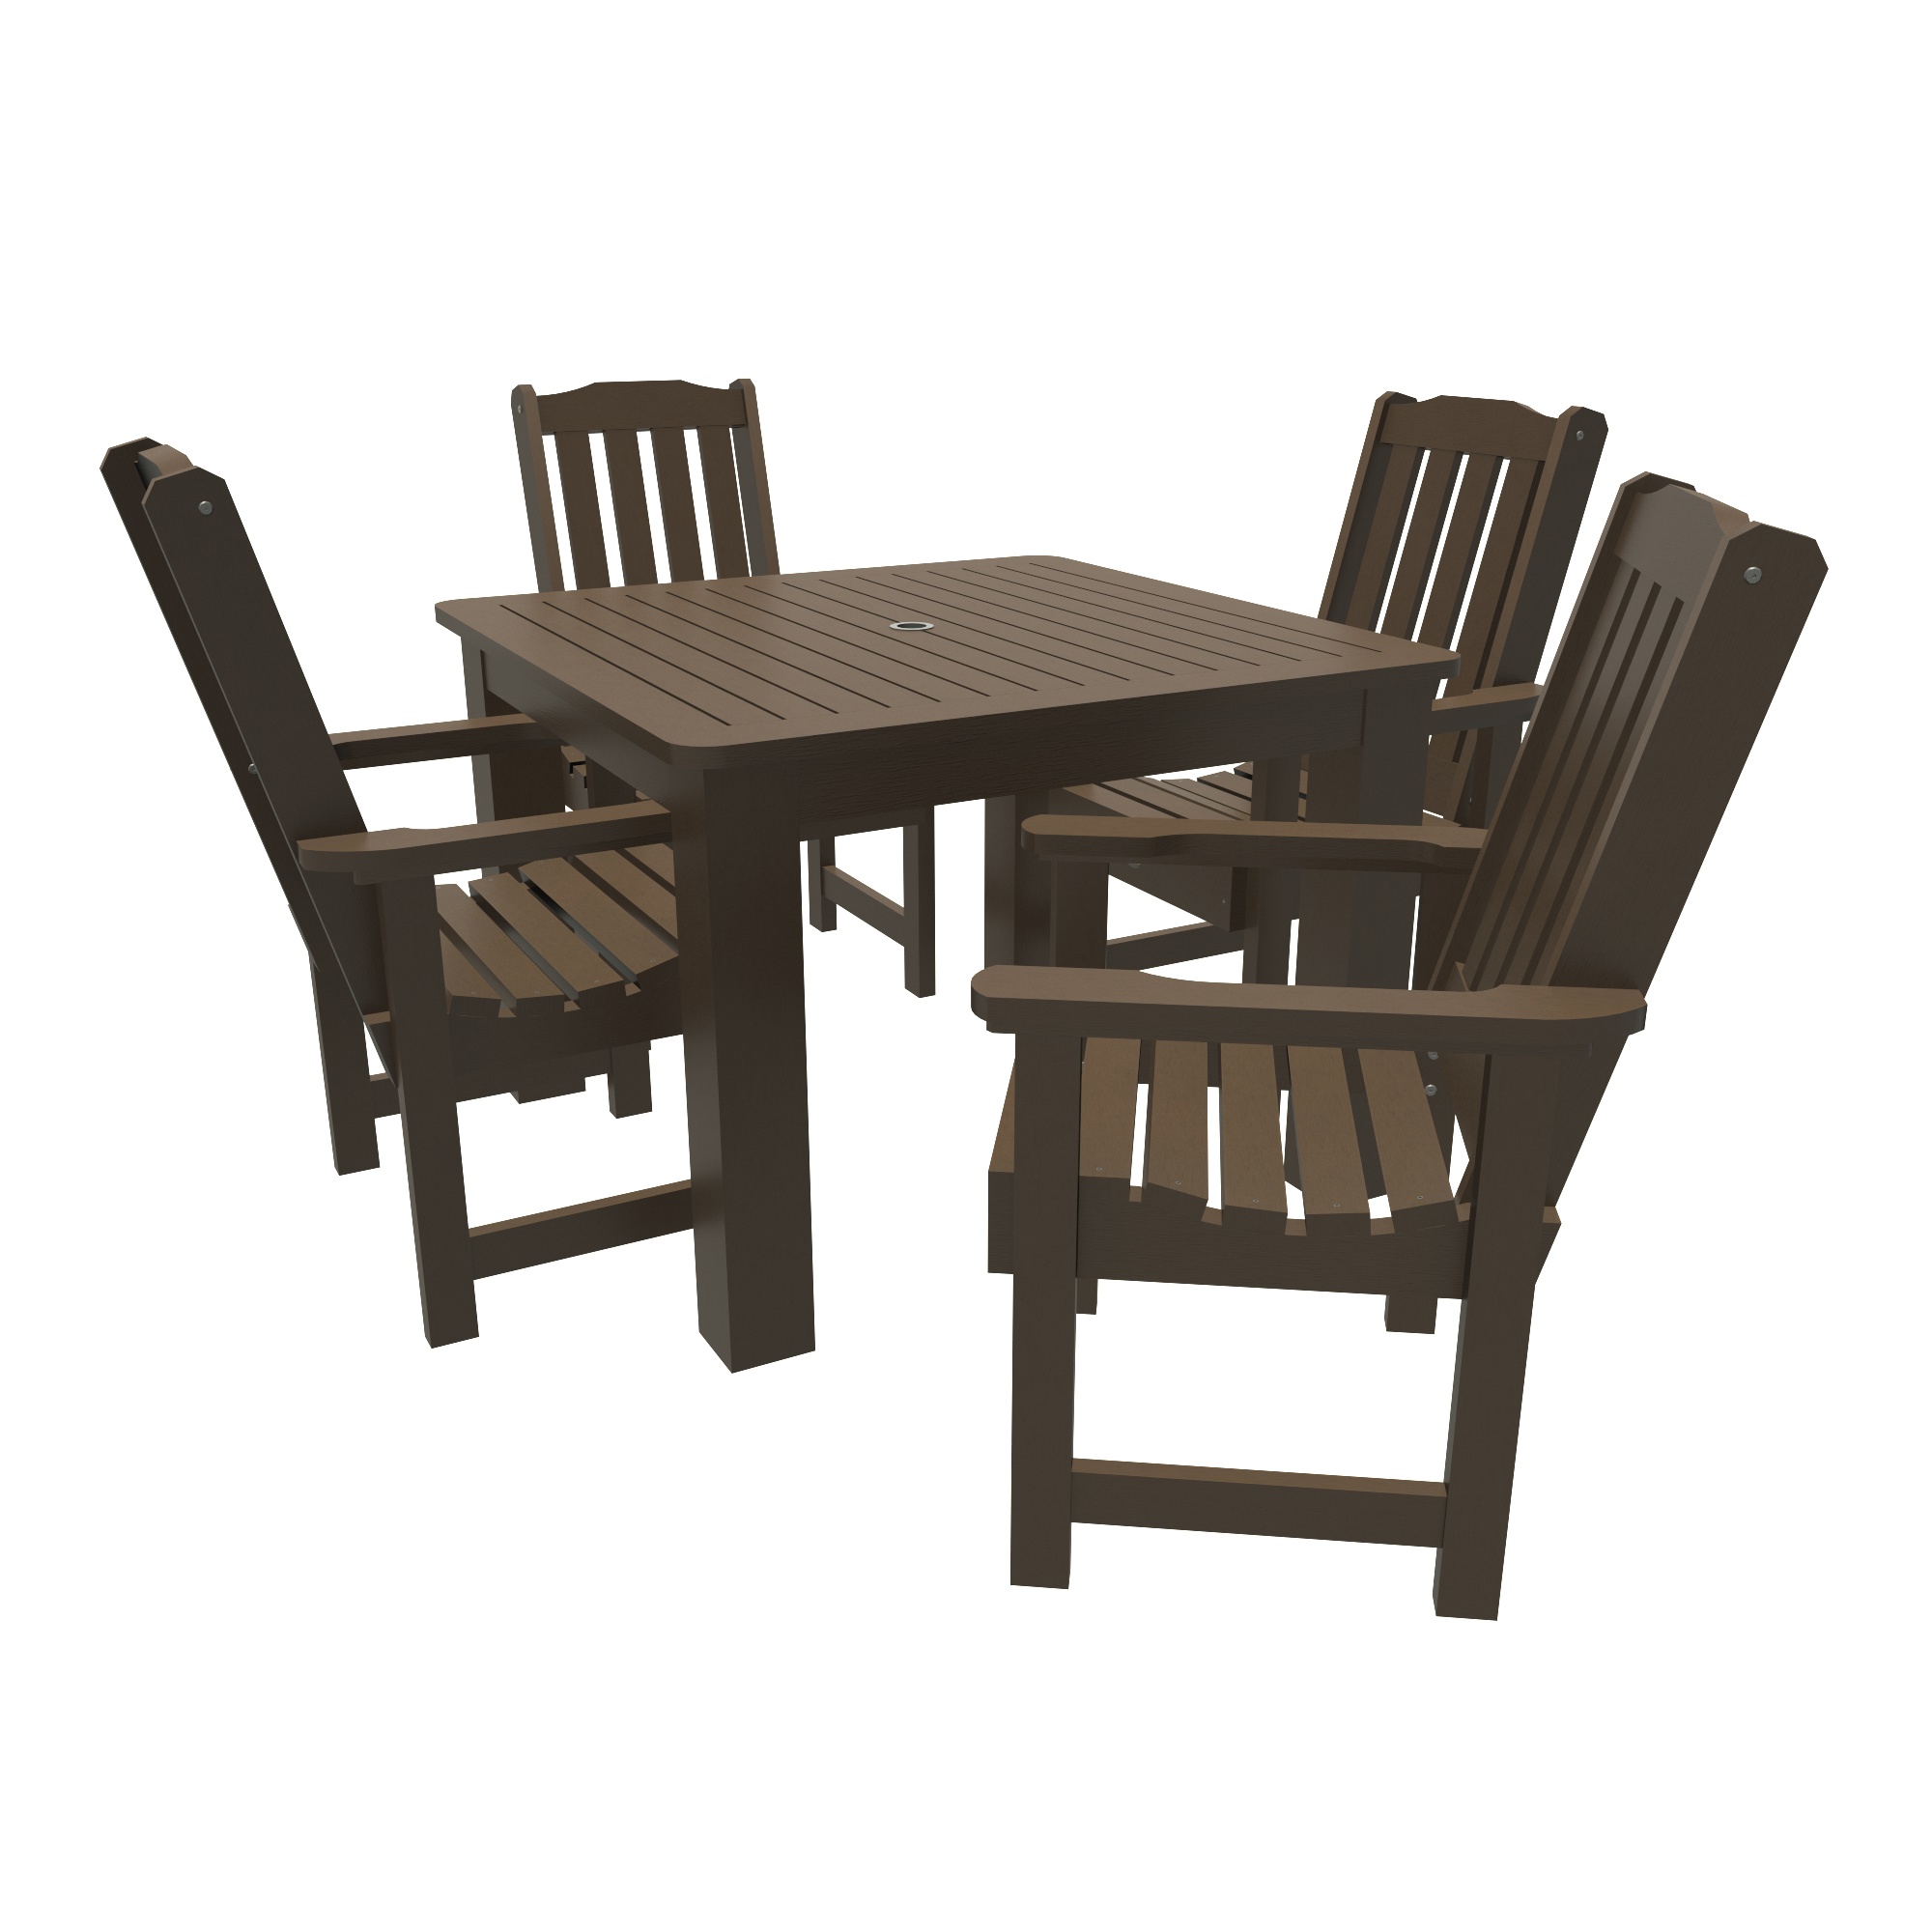 Highwood 5pc Lehigh Square Dining Set - Dining Height - image 1 of 8